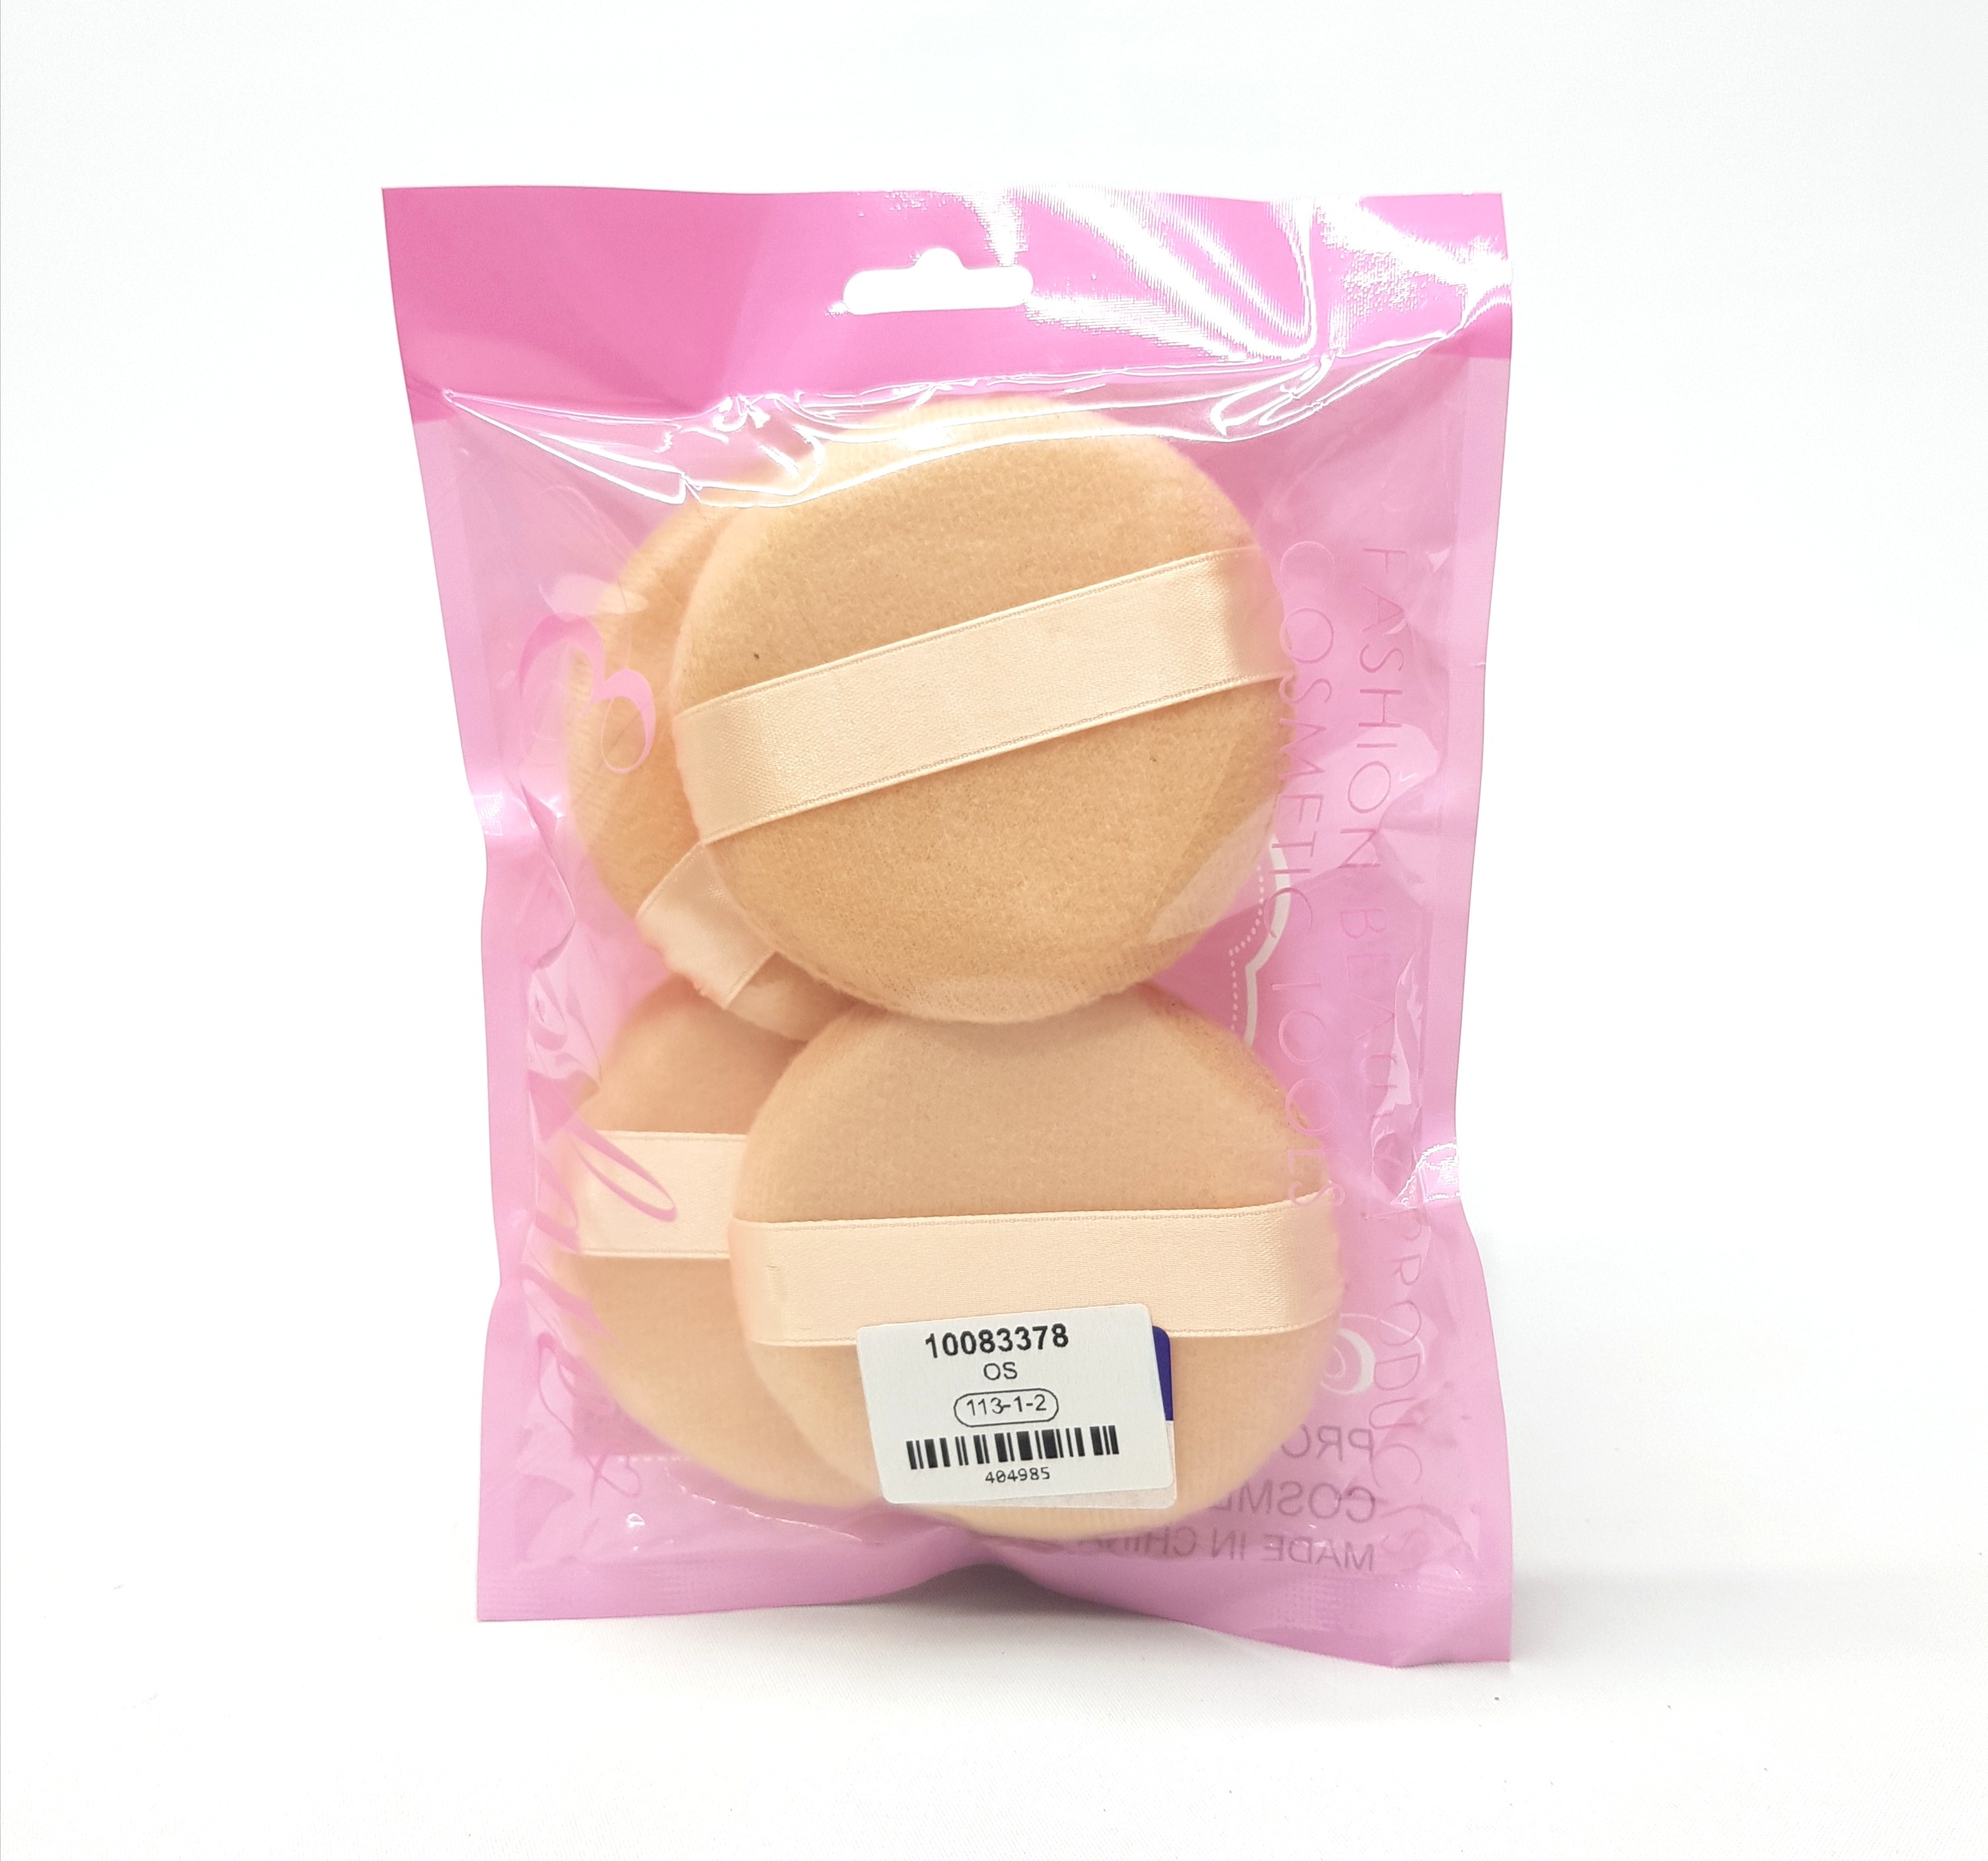 4 Pcs Powder Puff & Sponges For Makeup With Strip, Foundation Applicator